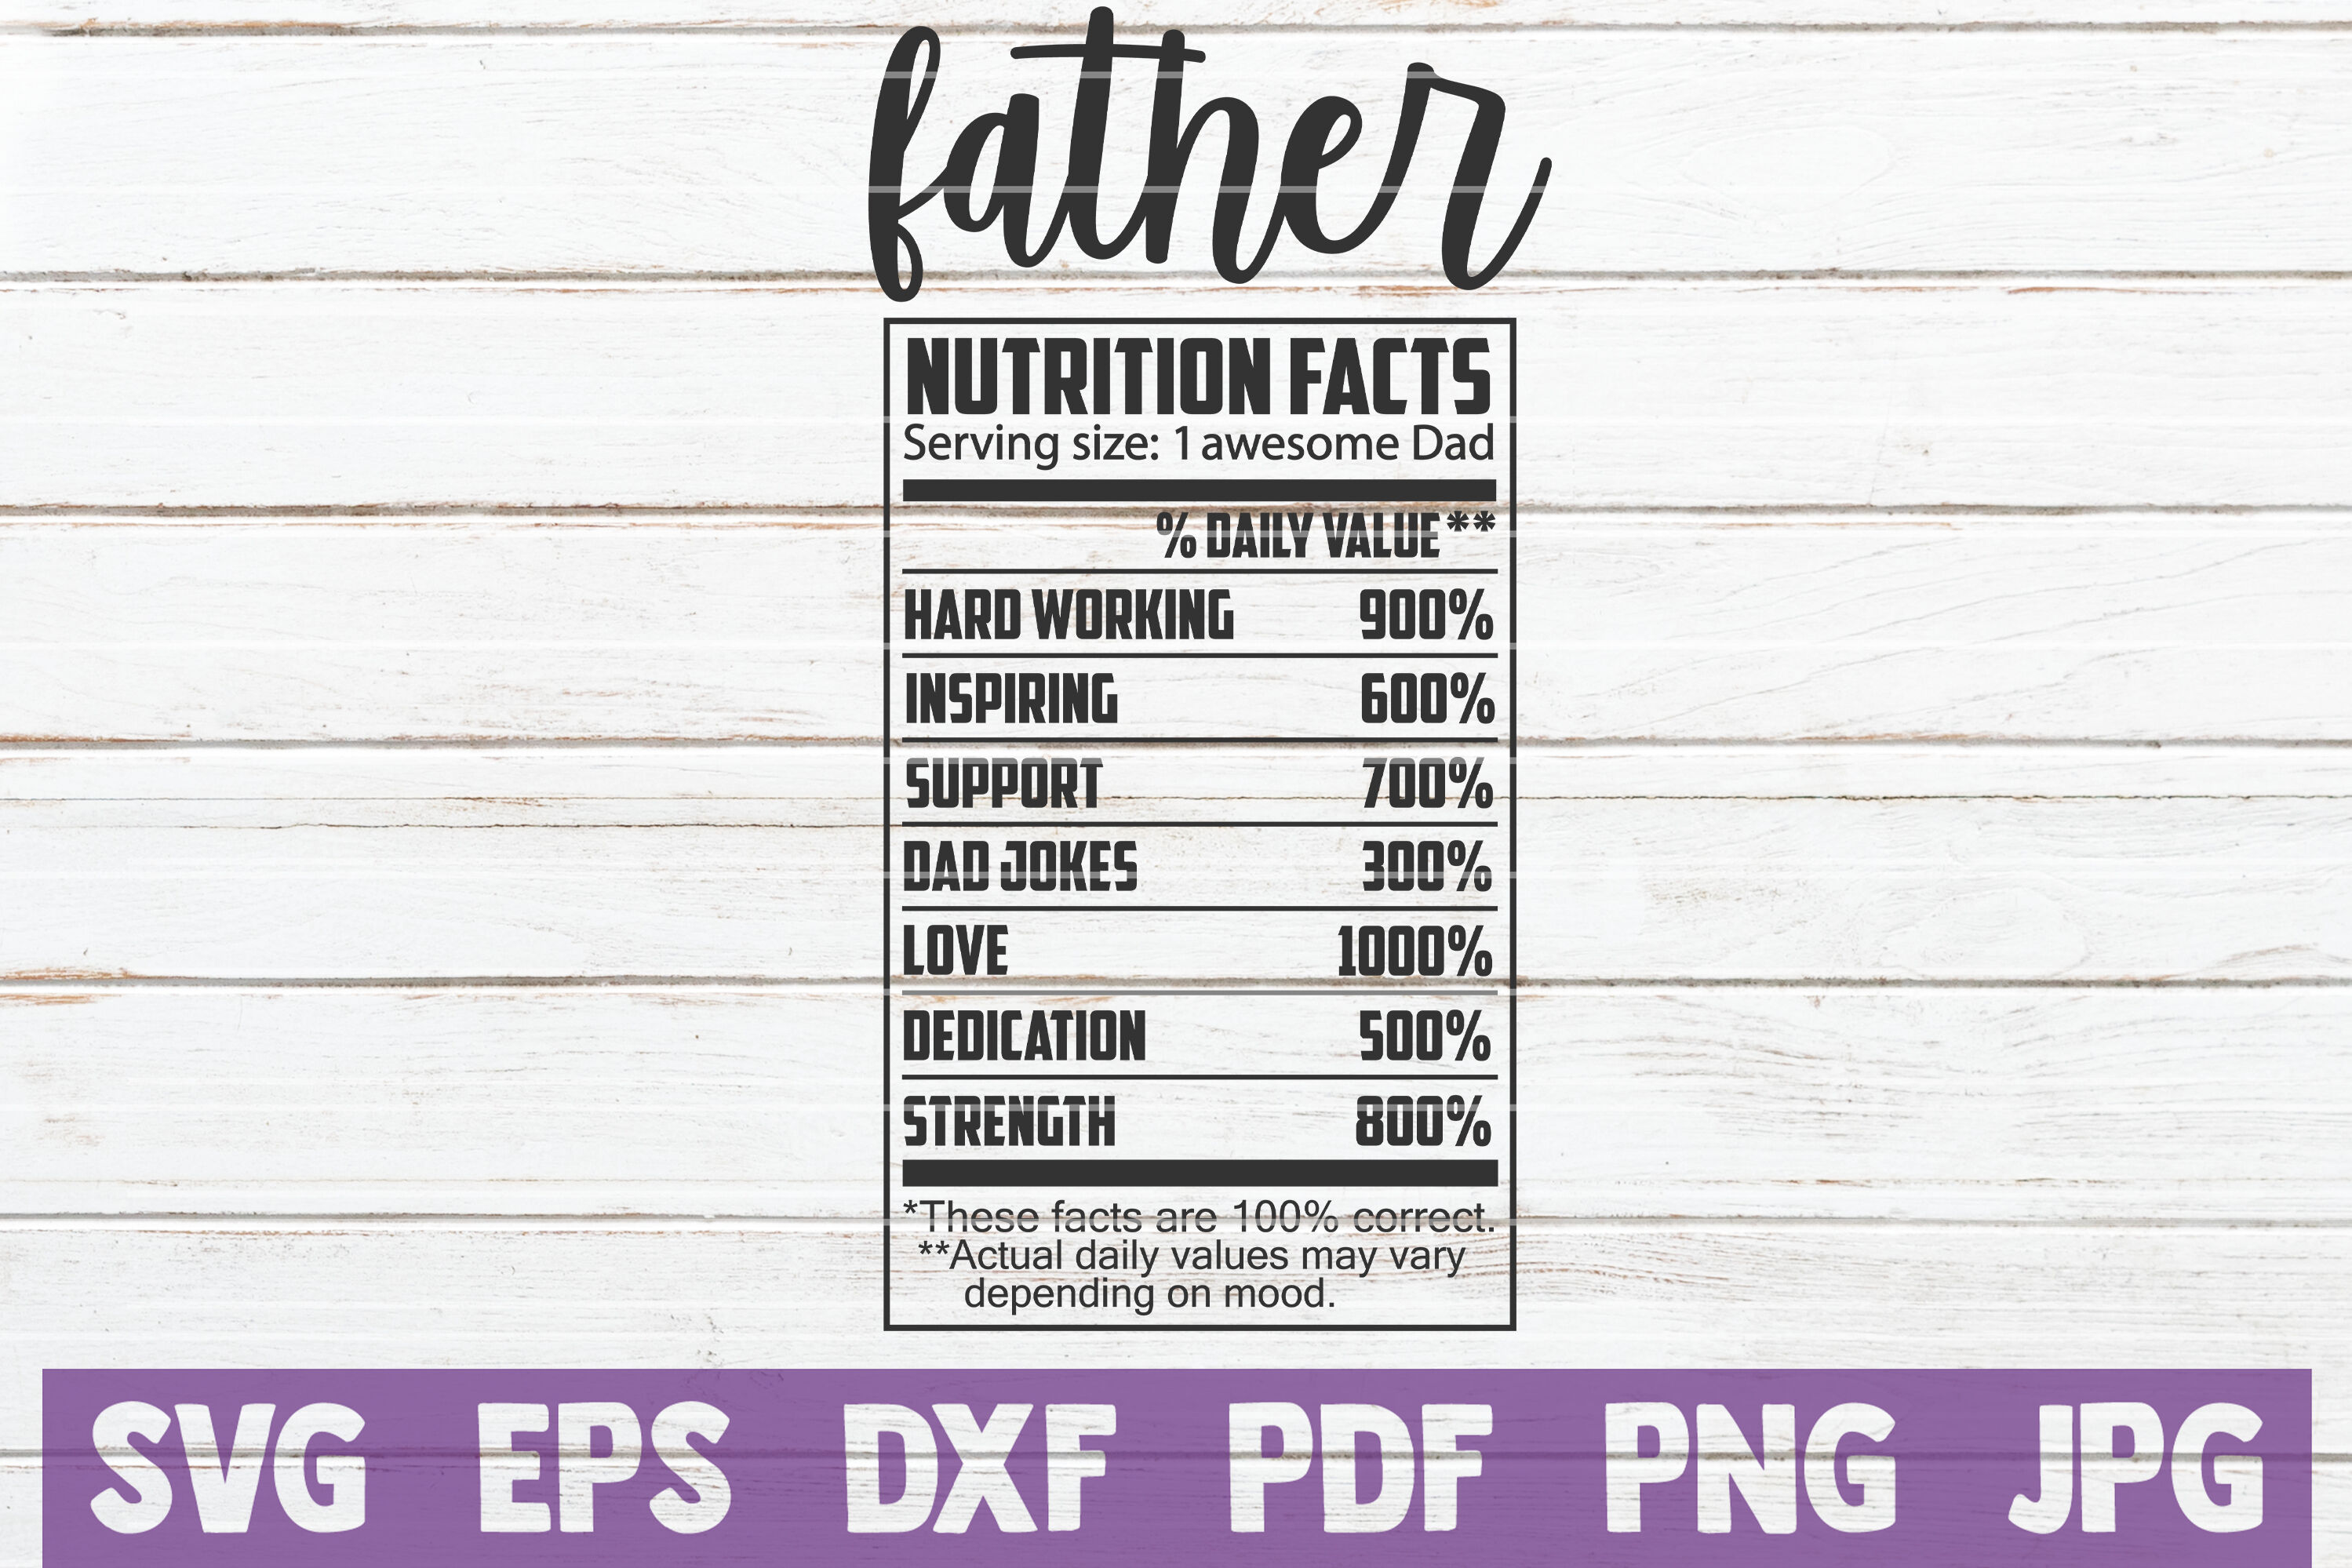 Father Nutrition Facts Svg Cut File By Mintymarshmallows Thehungryjpeg Com